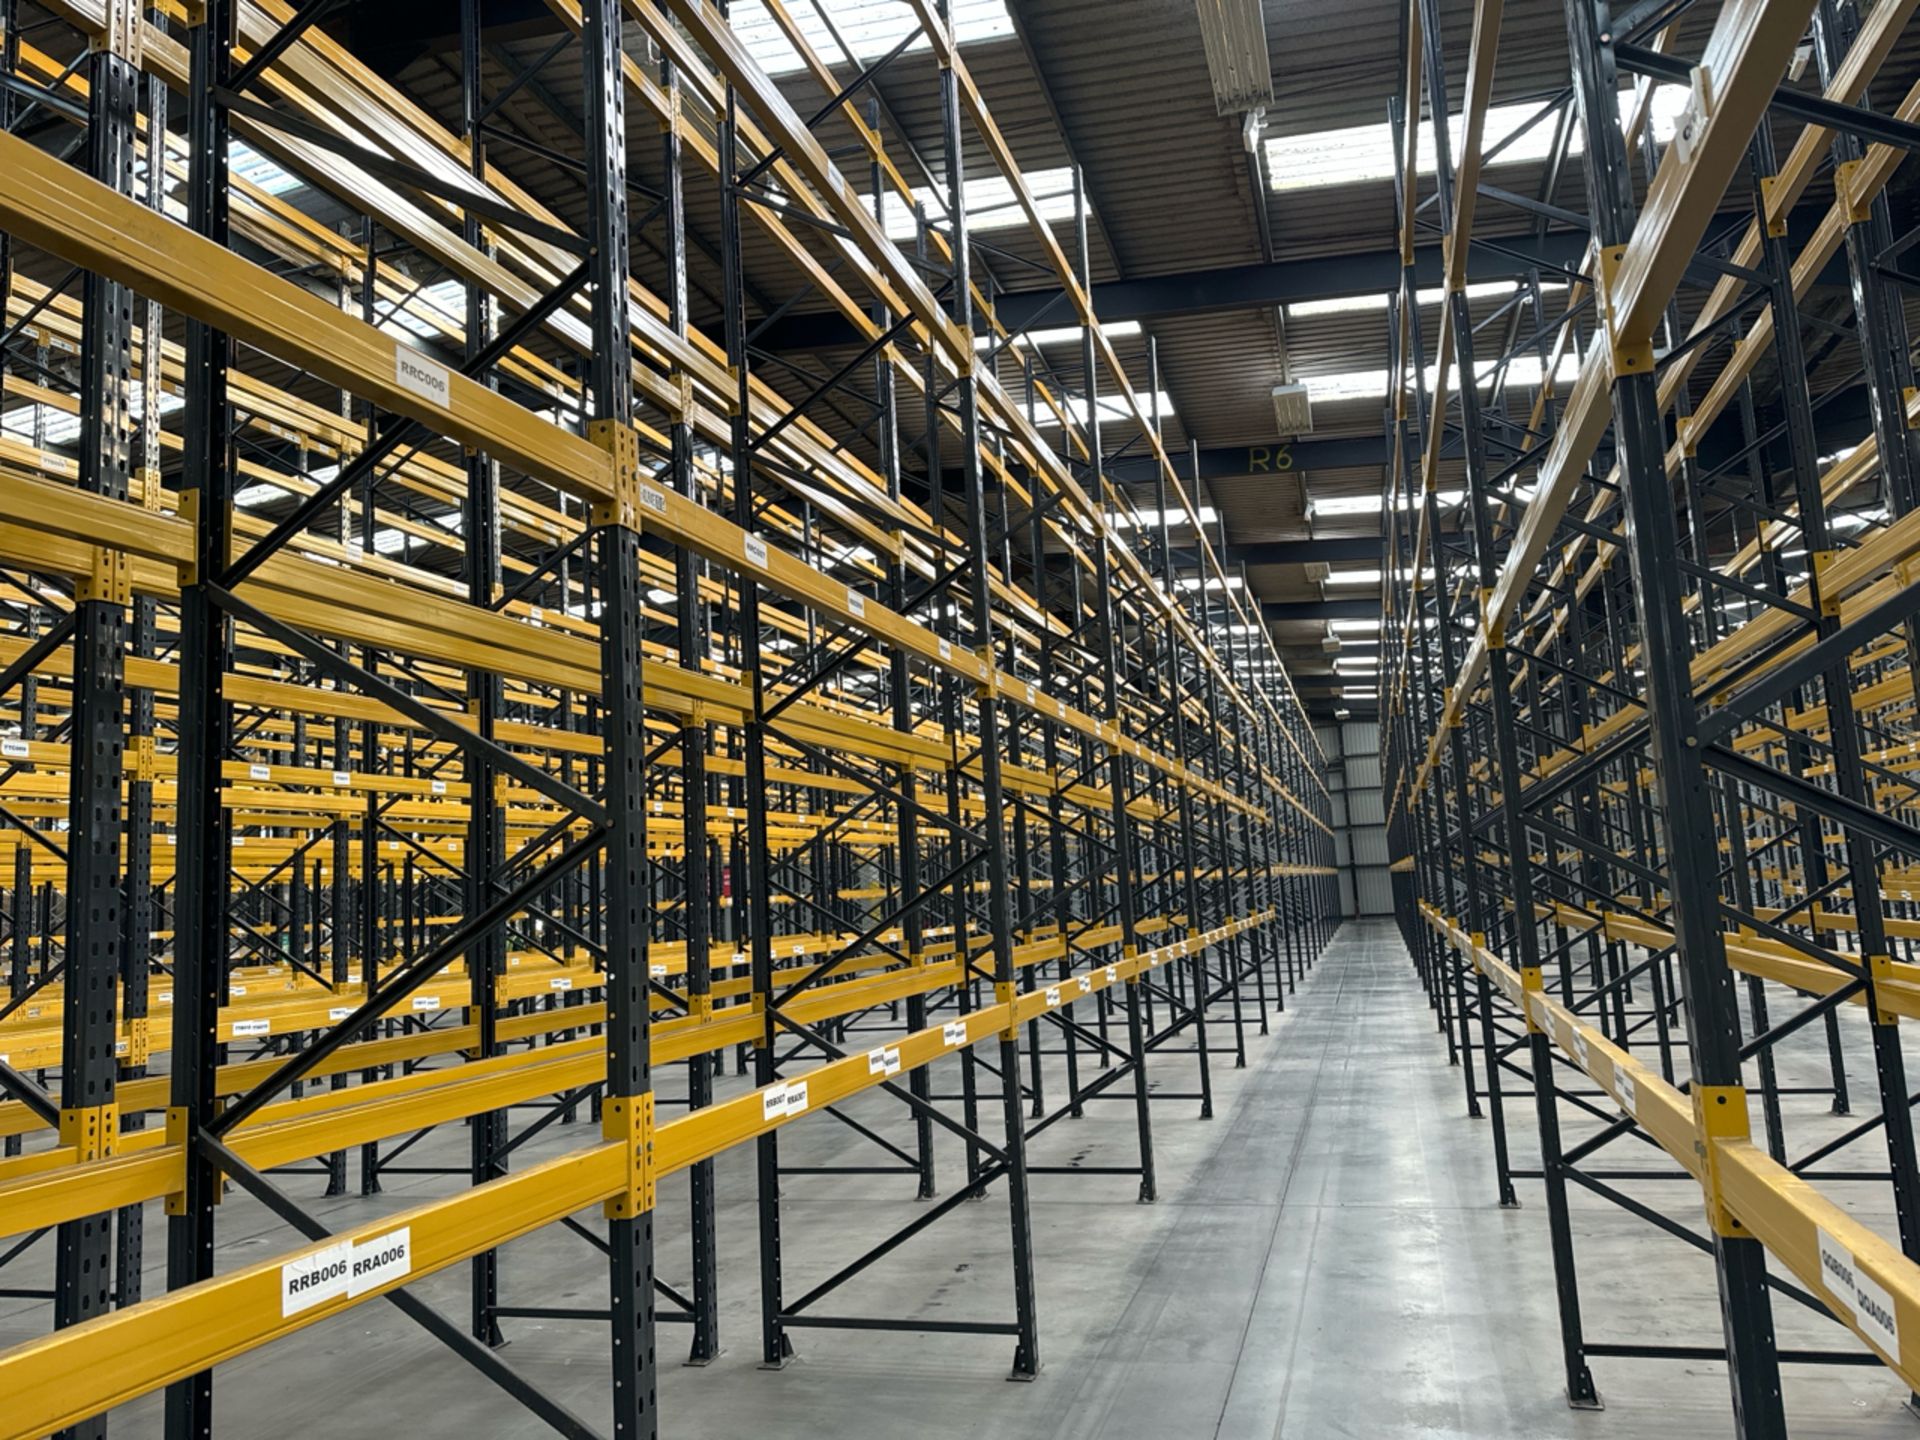 40 Bays Of Back To Back Boltless Industrial Pallet - Image 8 of 8